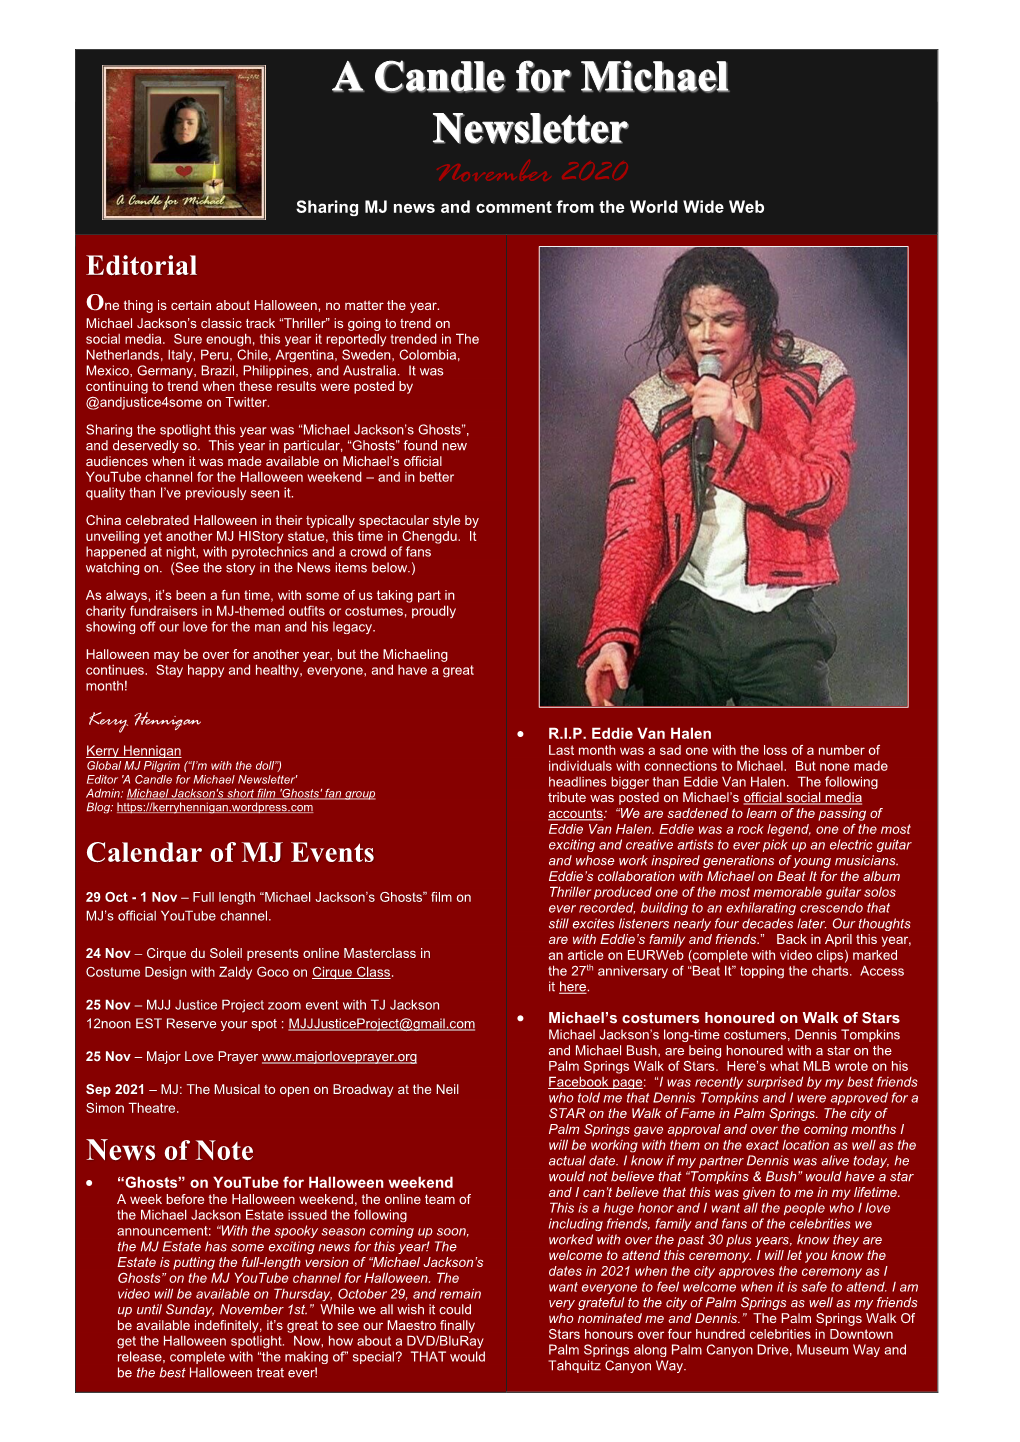 November 2020 Sharing MJ News and Comment from the World Wide Web